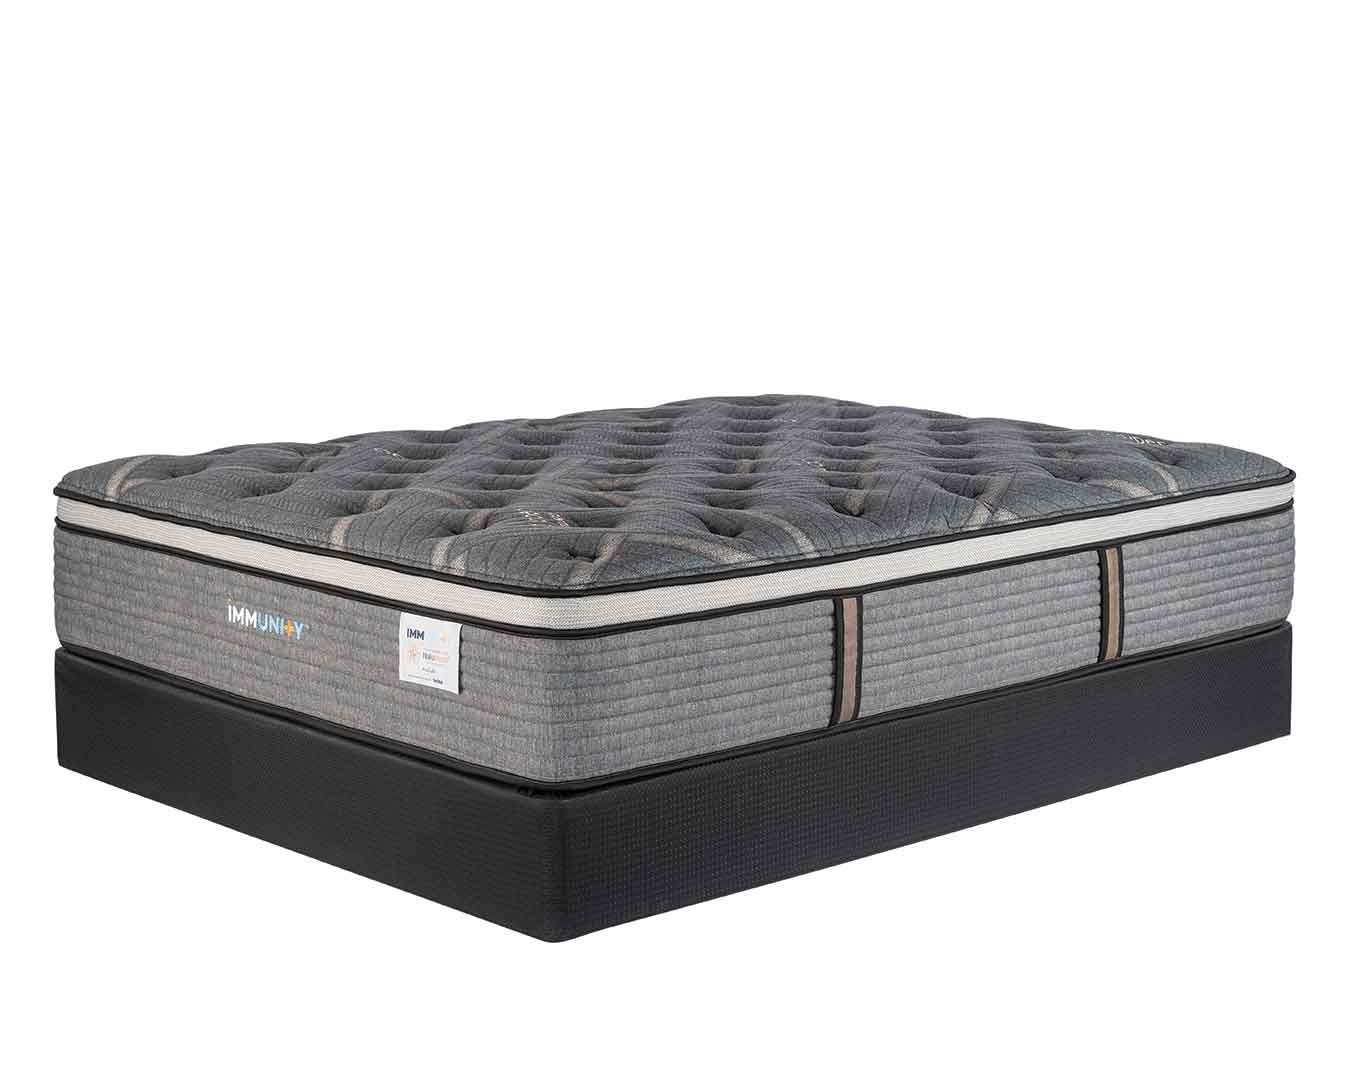 Immunity Auburn copper mattress on agility foundation at an angle with a white background.